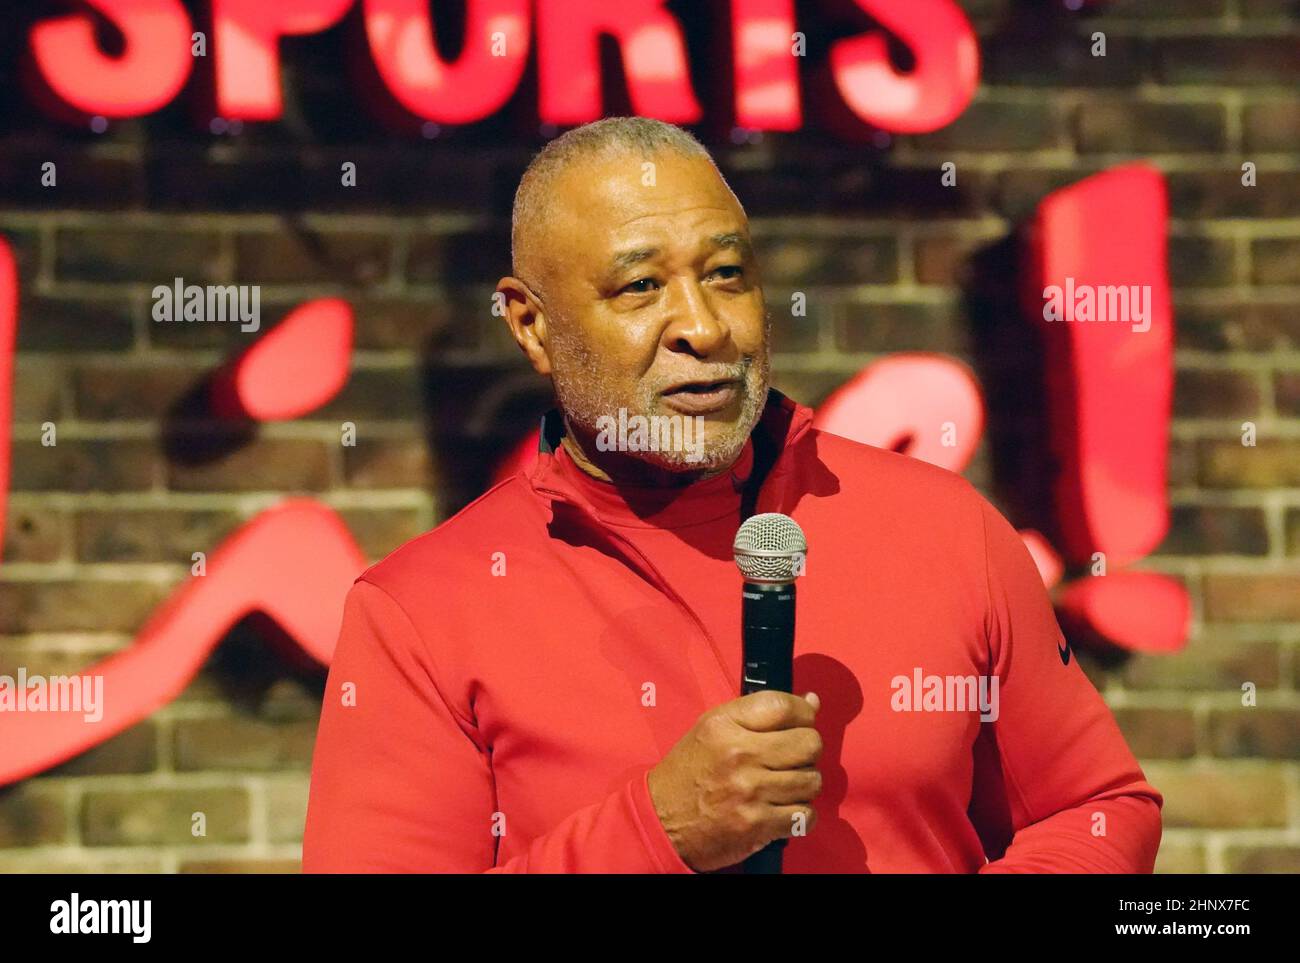 St. Louis, USA. 17th Feb, 2022. Former St. Louis Cardinals shortstop and  member of the National Baseball Hall of Fame, Ozzie Smith introduces  members of the 1982 World Champion St. Louis Cardinals